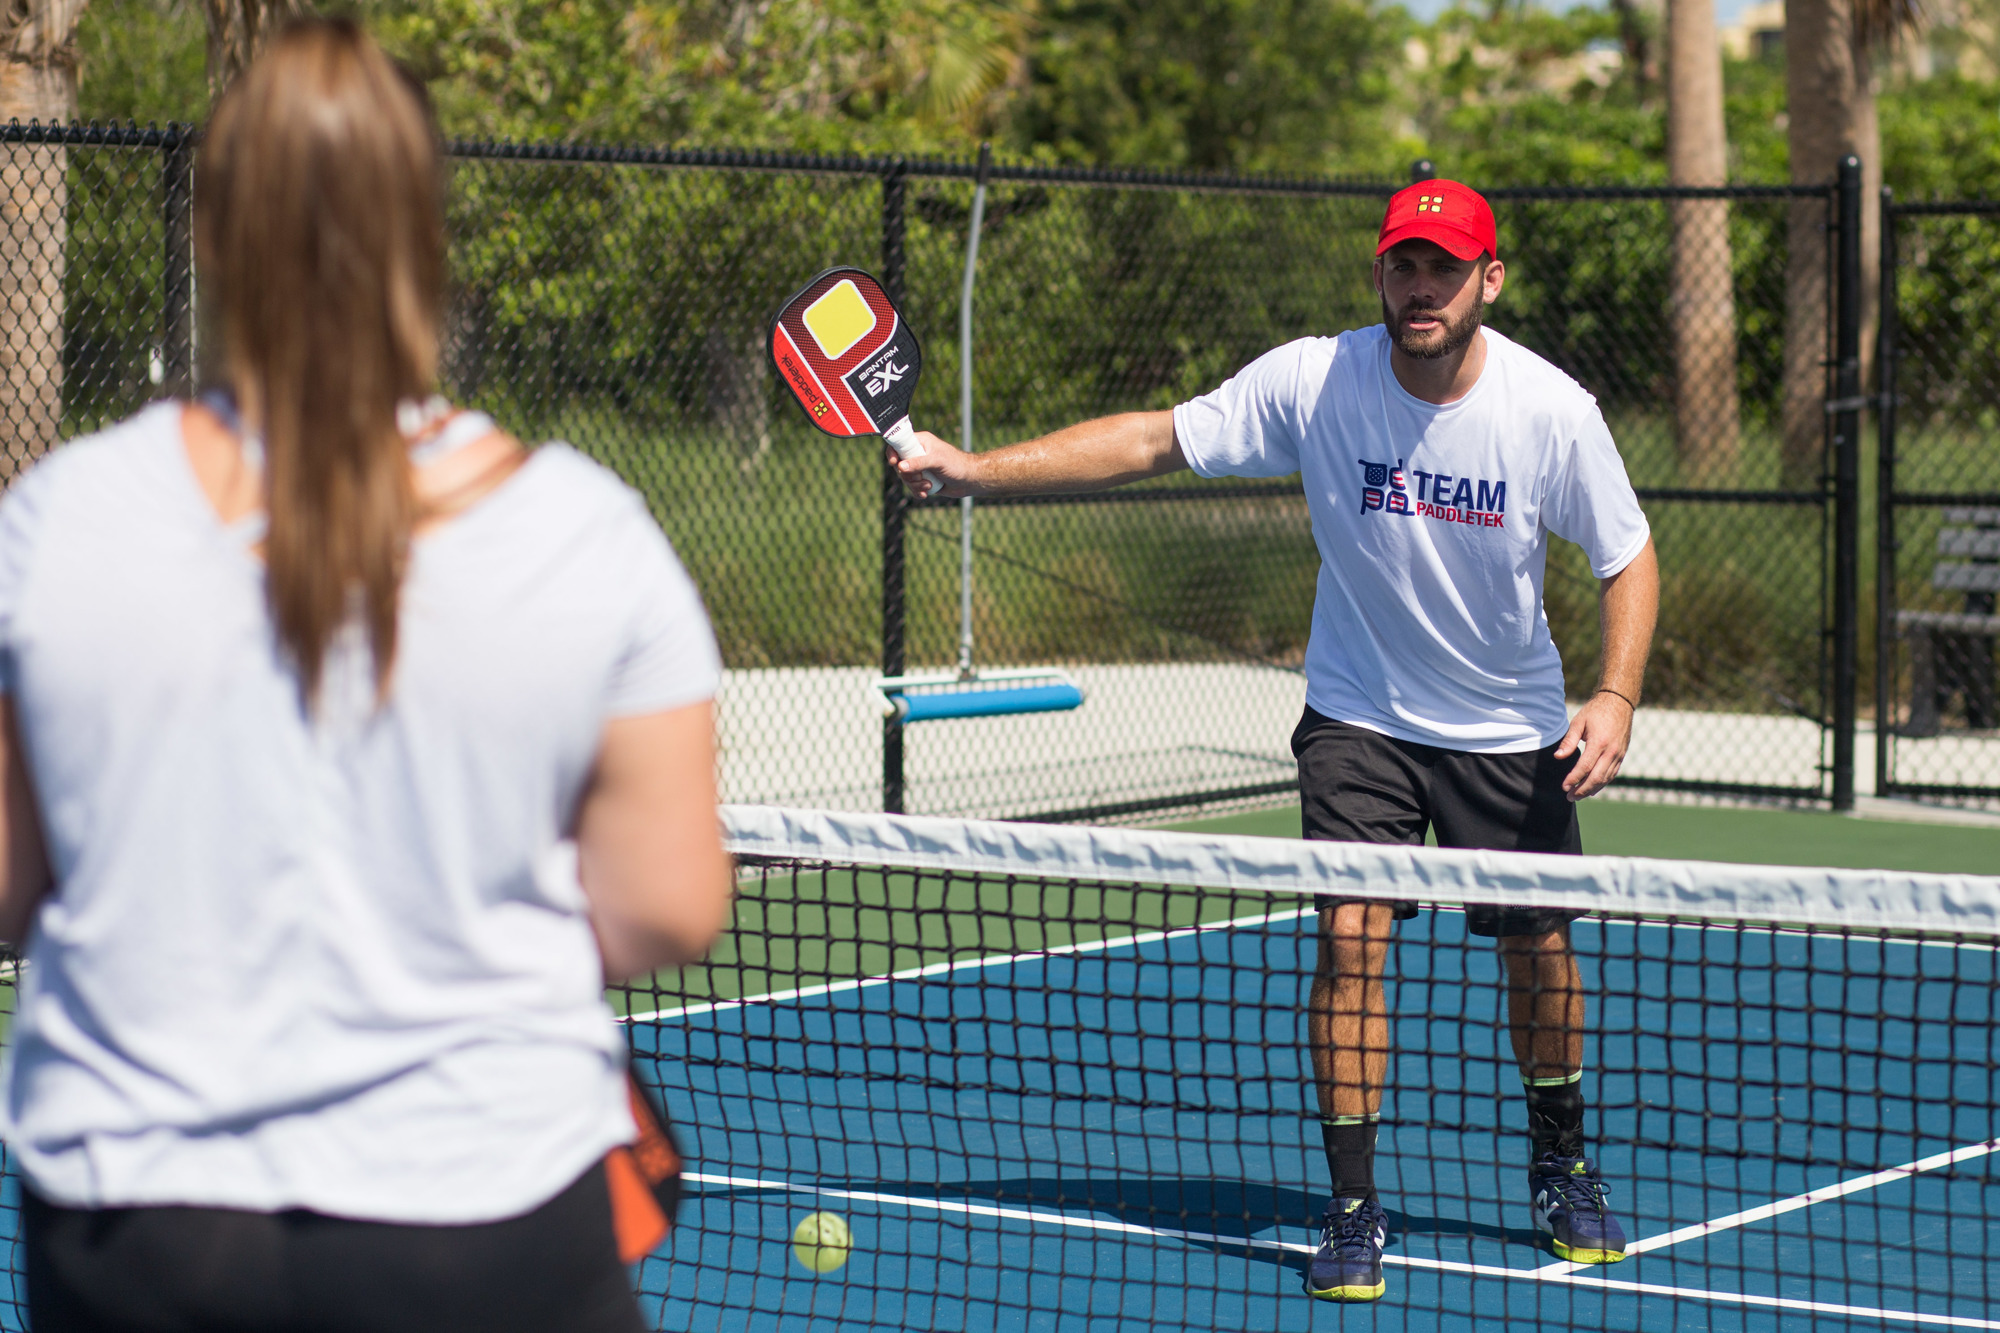 Jared Brooks began playing pickleball about two years ago following a spontaneous game after a tennis match. Photos by Kayleigh Omang